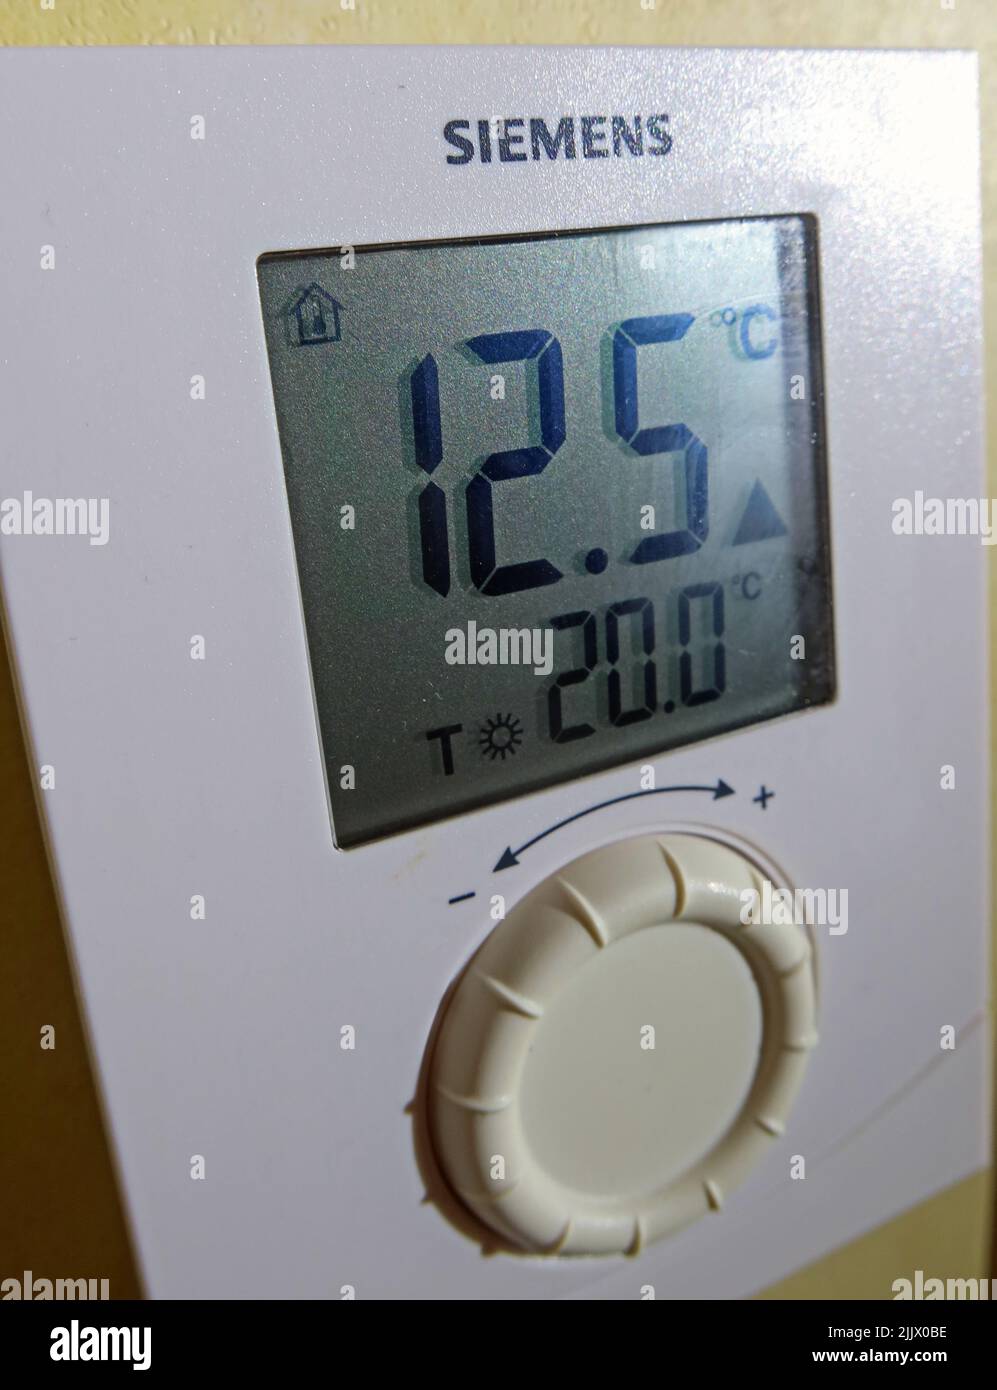 Home heating thermostat in cold weather (12deg), with target temperature of 20dec. Challenges of being able to afford adequate heating Stock Photo